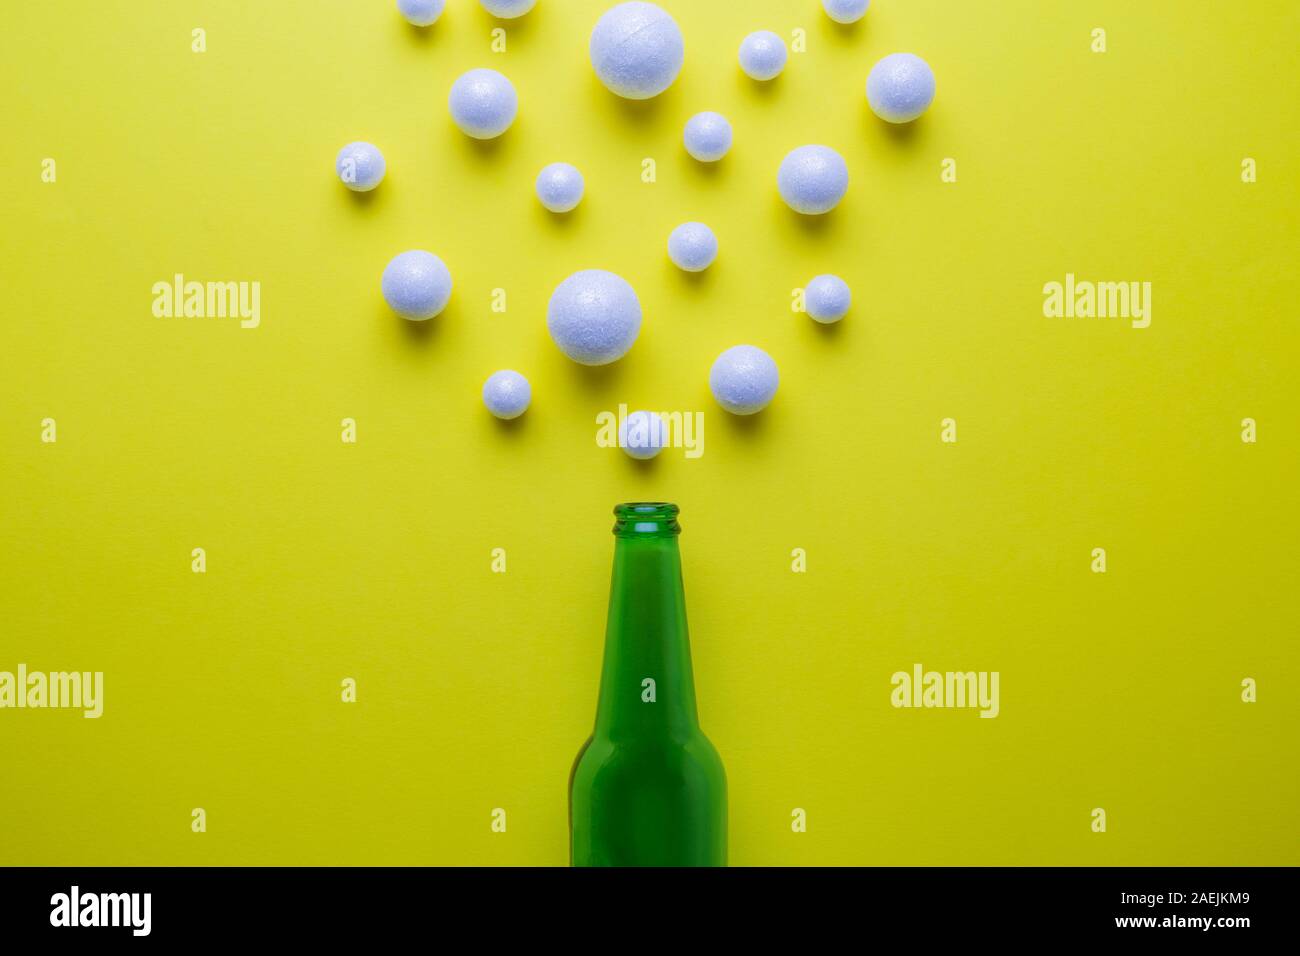 Beer abstract made of green bottle and styrofoam balls on yellow. Stock Photo